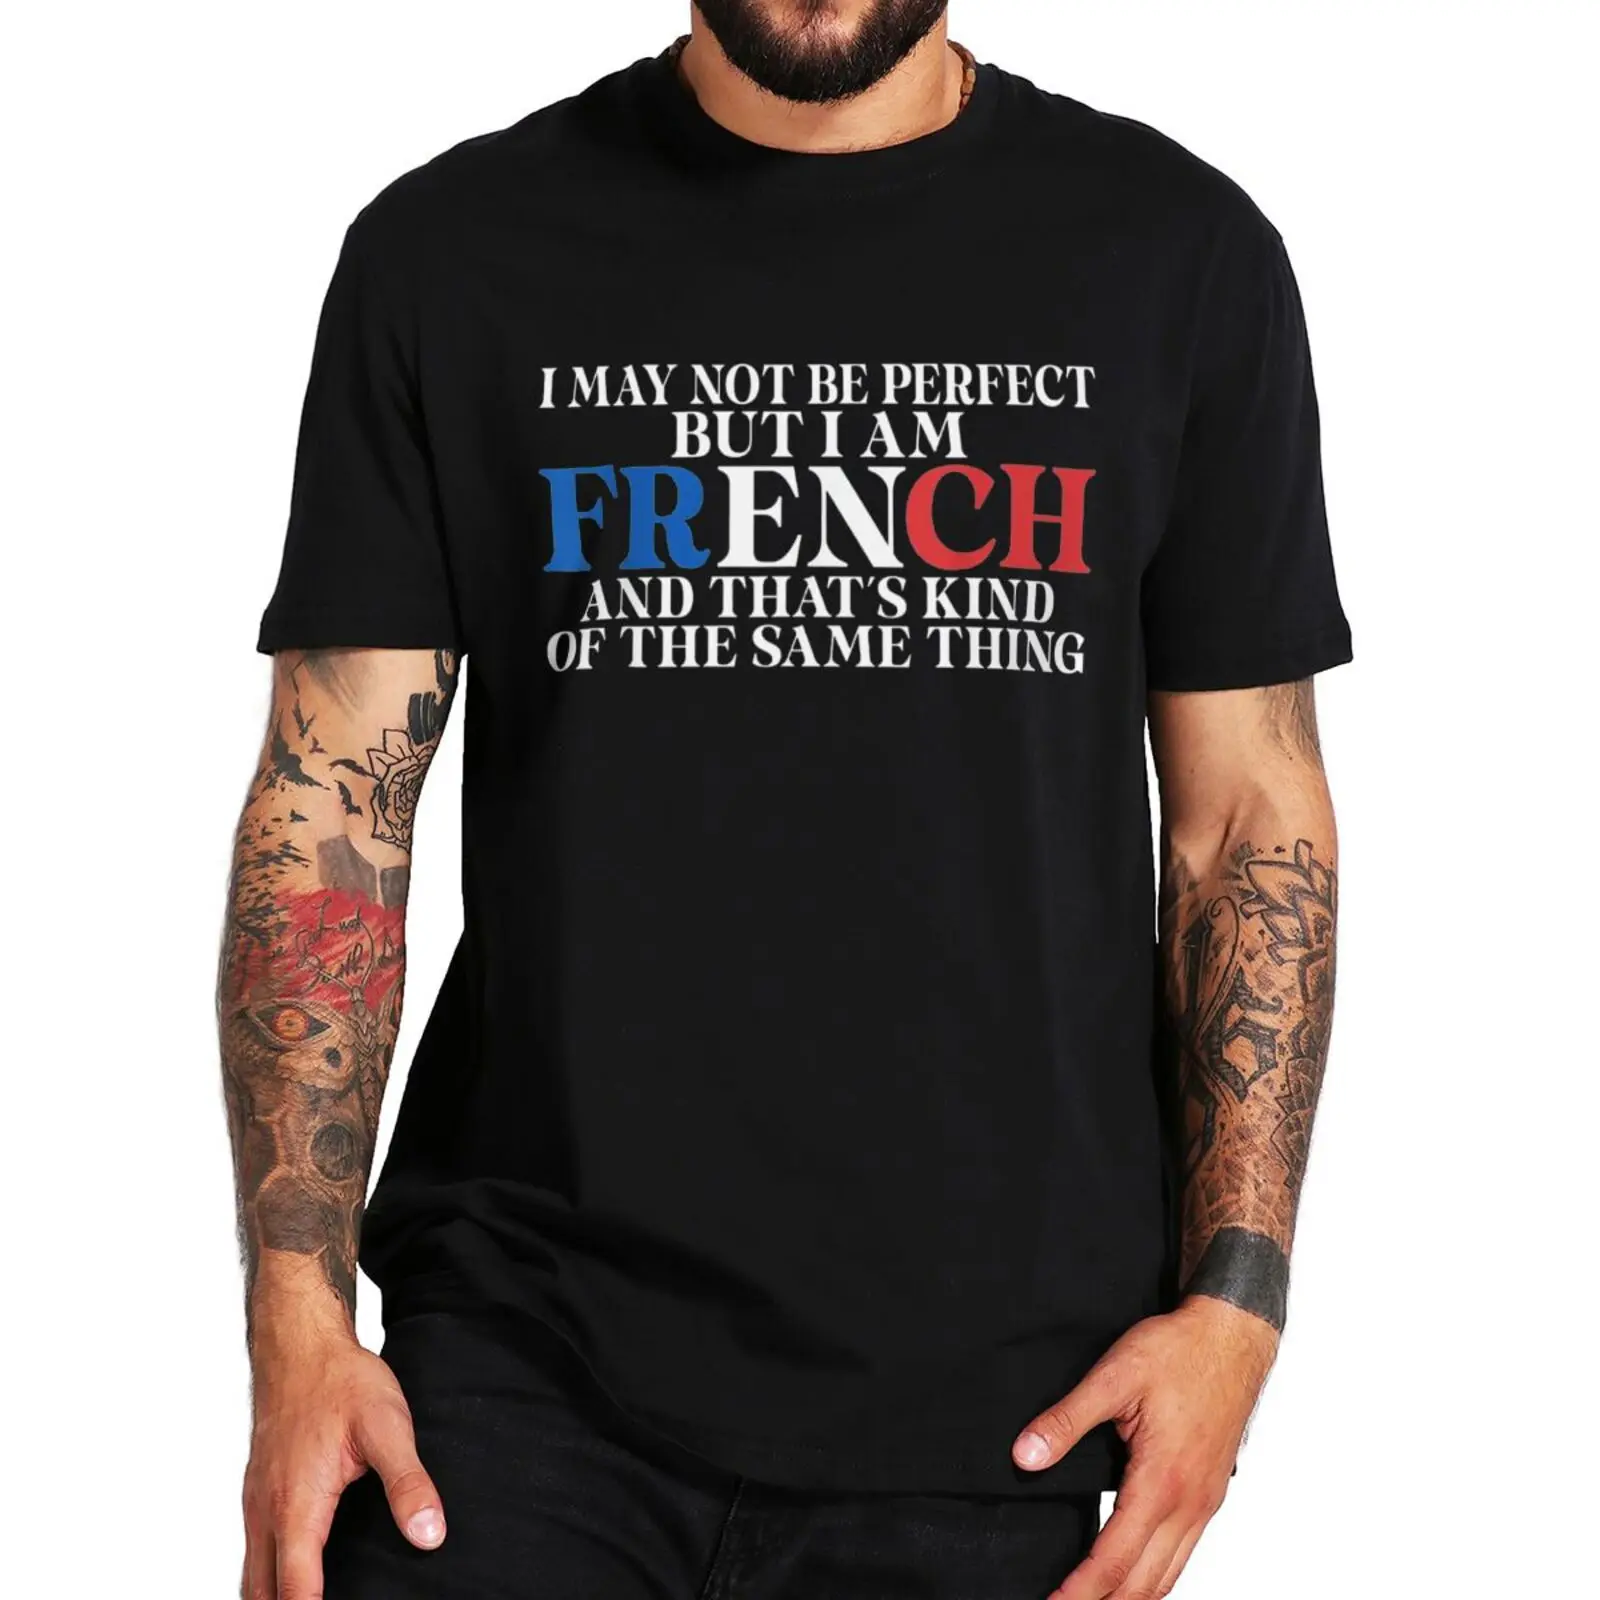 

I May Not Be Perfect But I'm French T-Shirt Funny Sayings Meme Jokes Humor French Pride Tee Tops Cotton Unisex Casual T Shirt